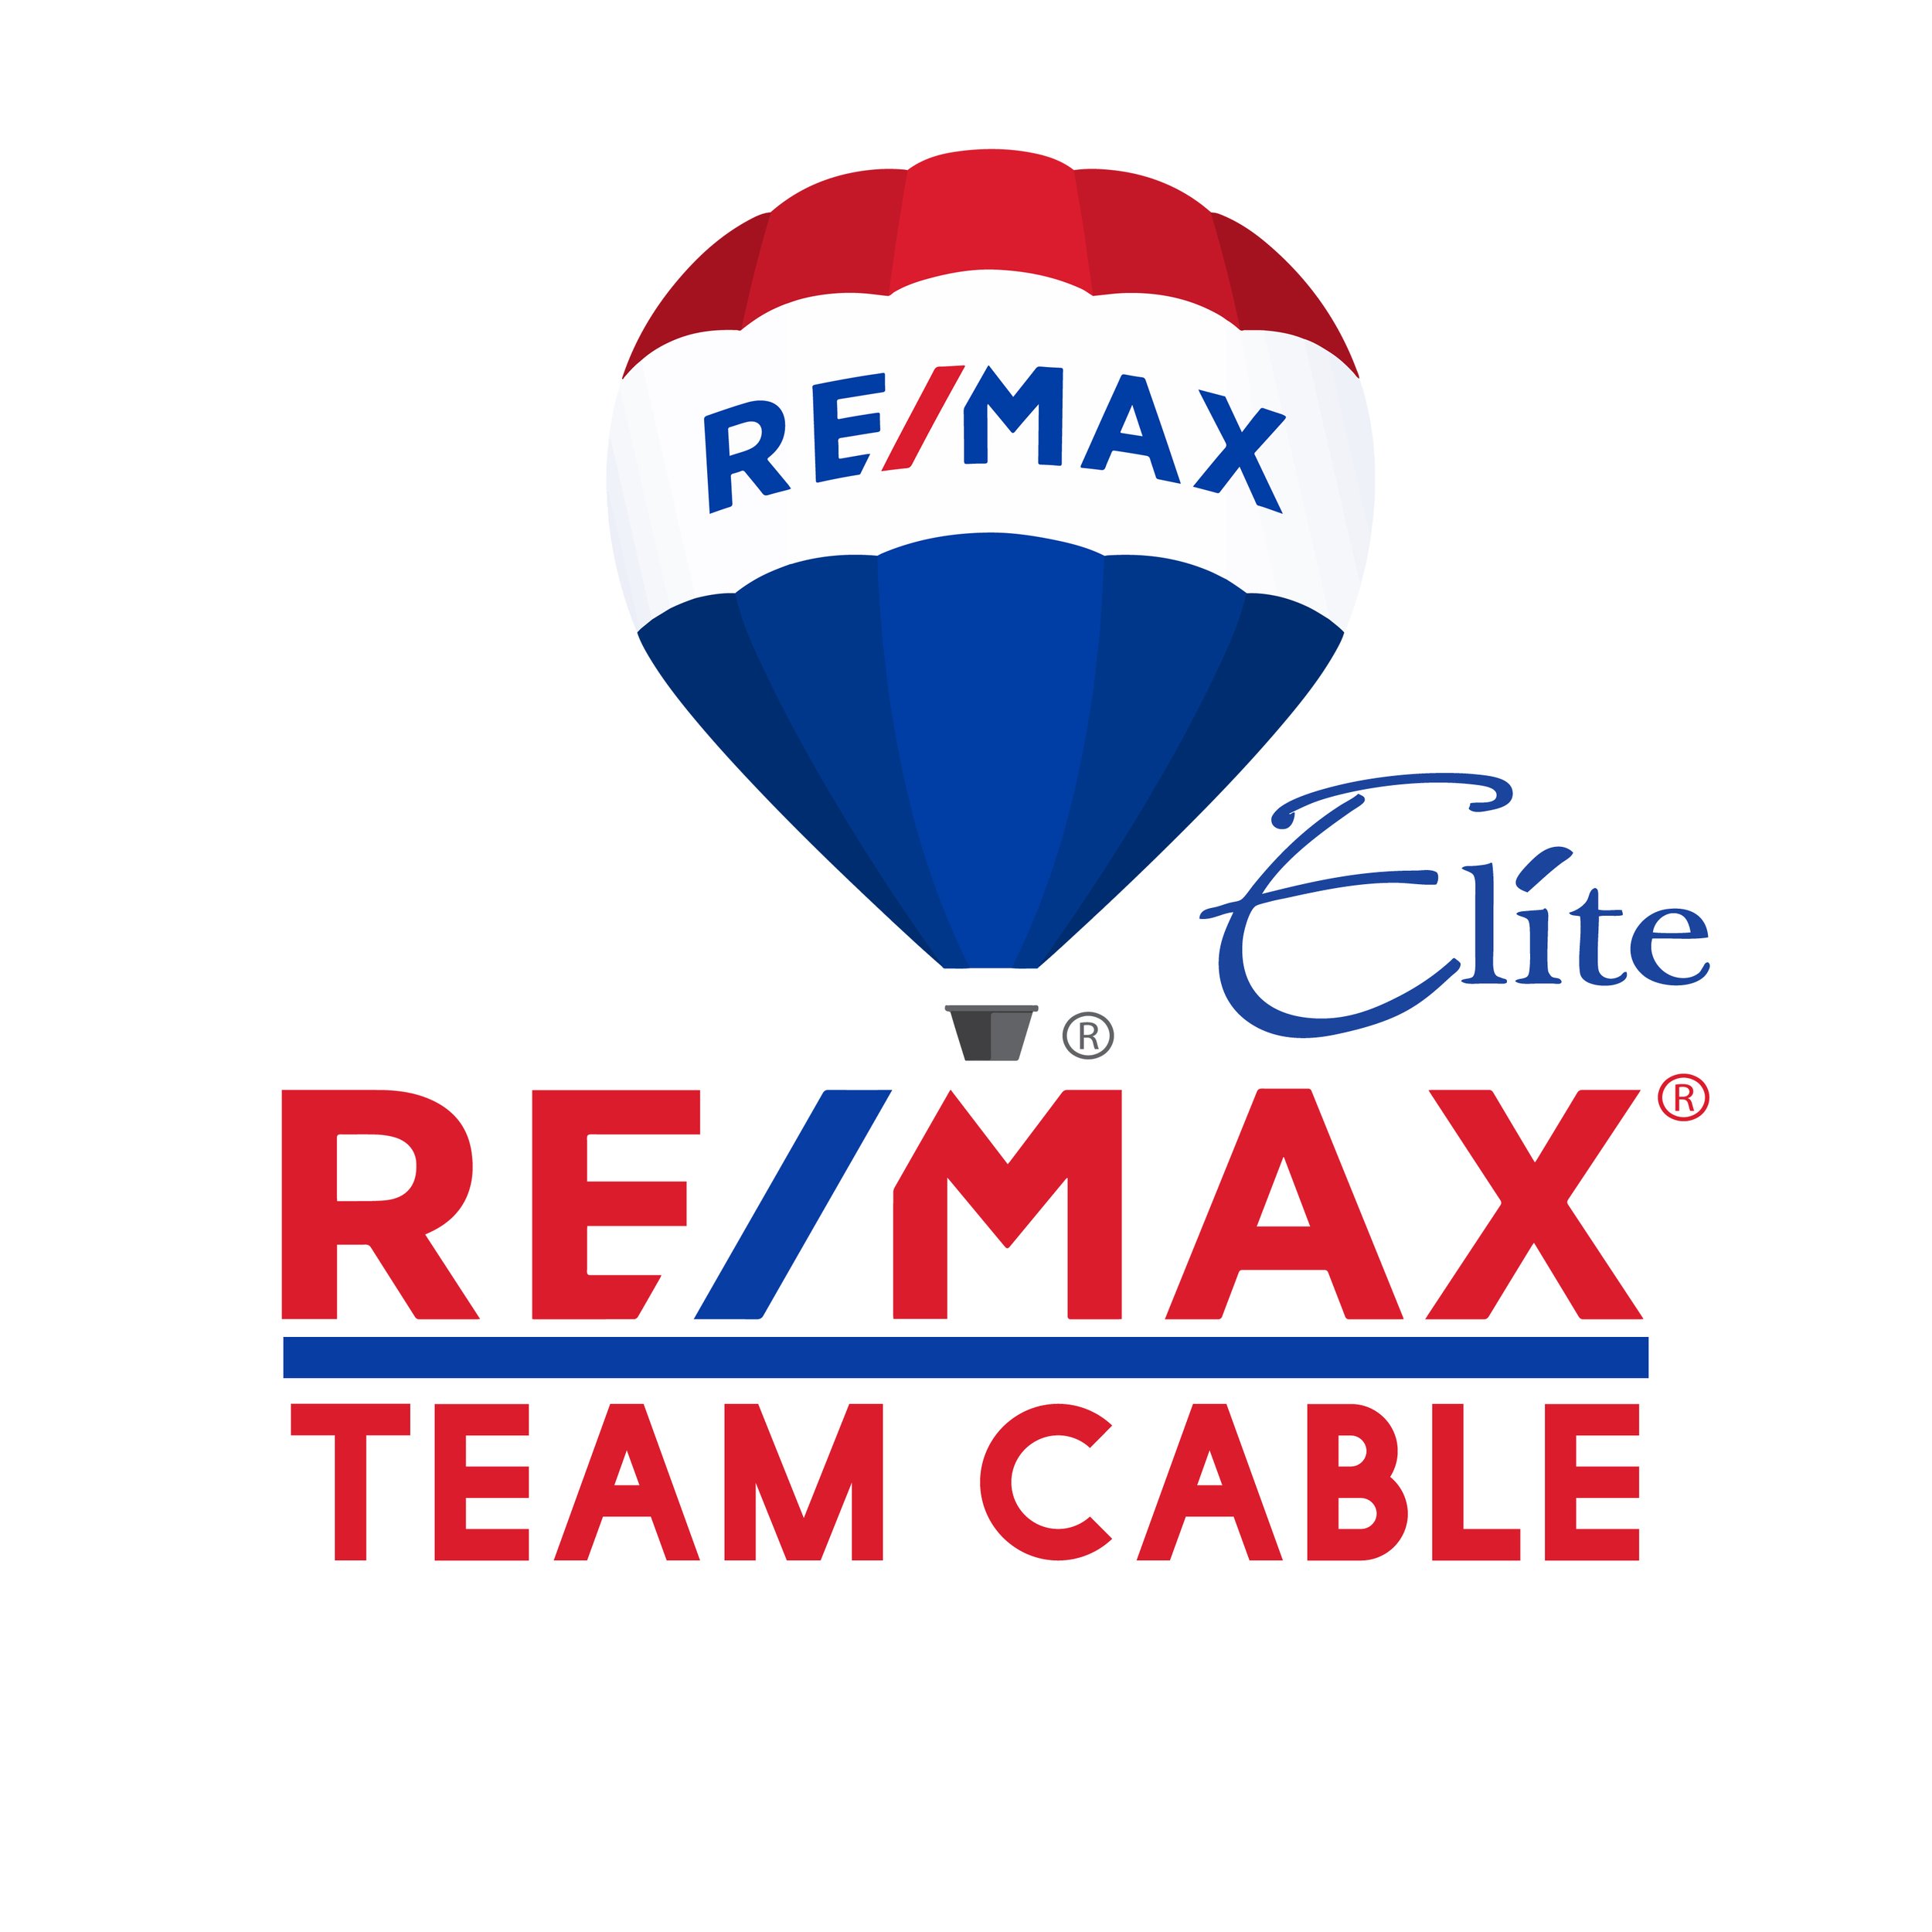 Team-Cable-Remax-Elite-tall.jpg